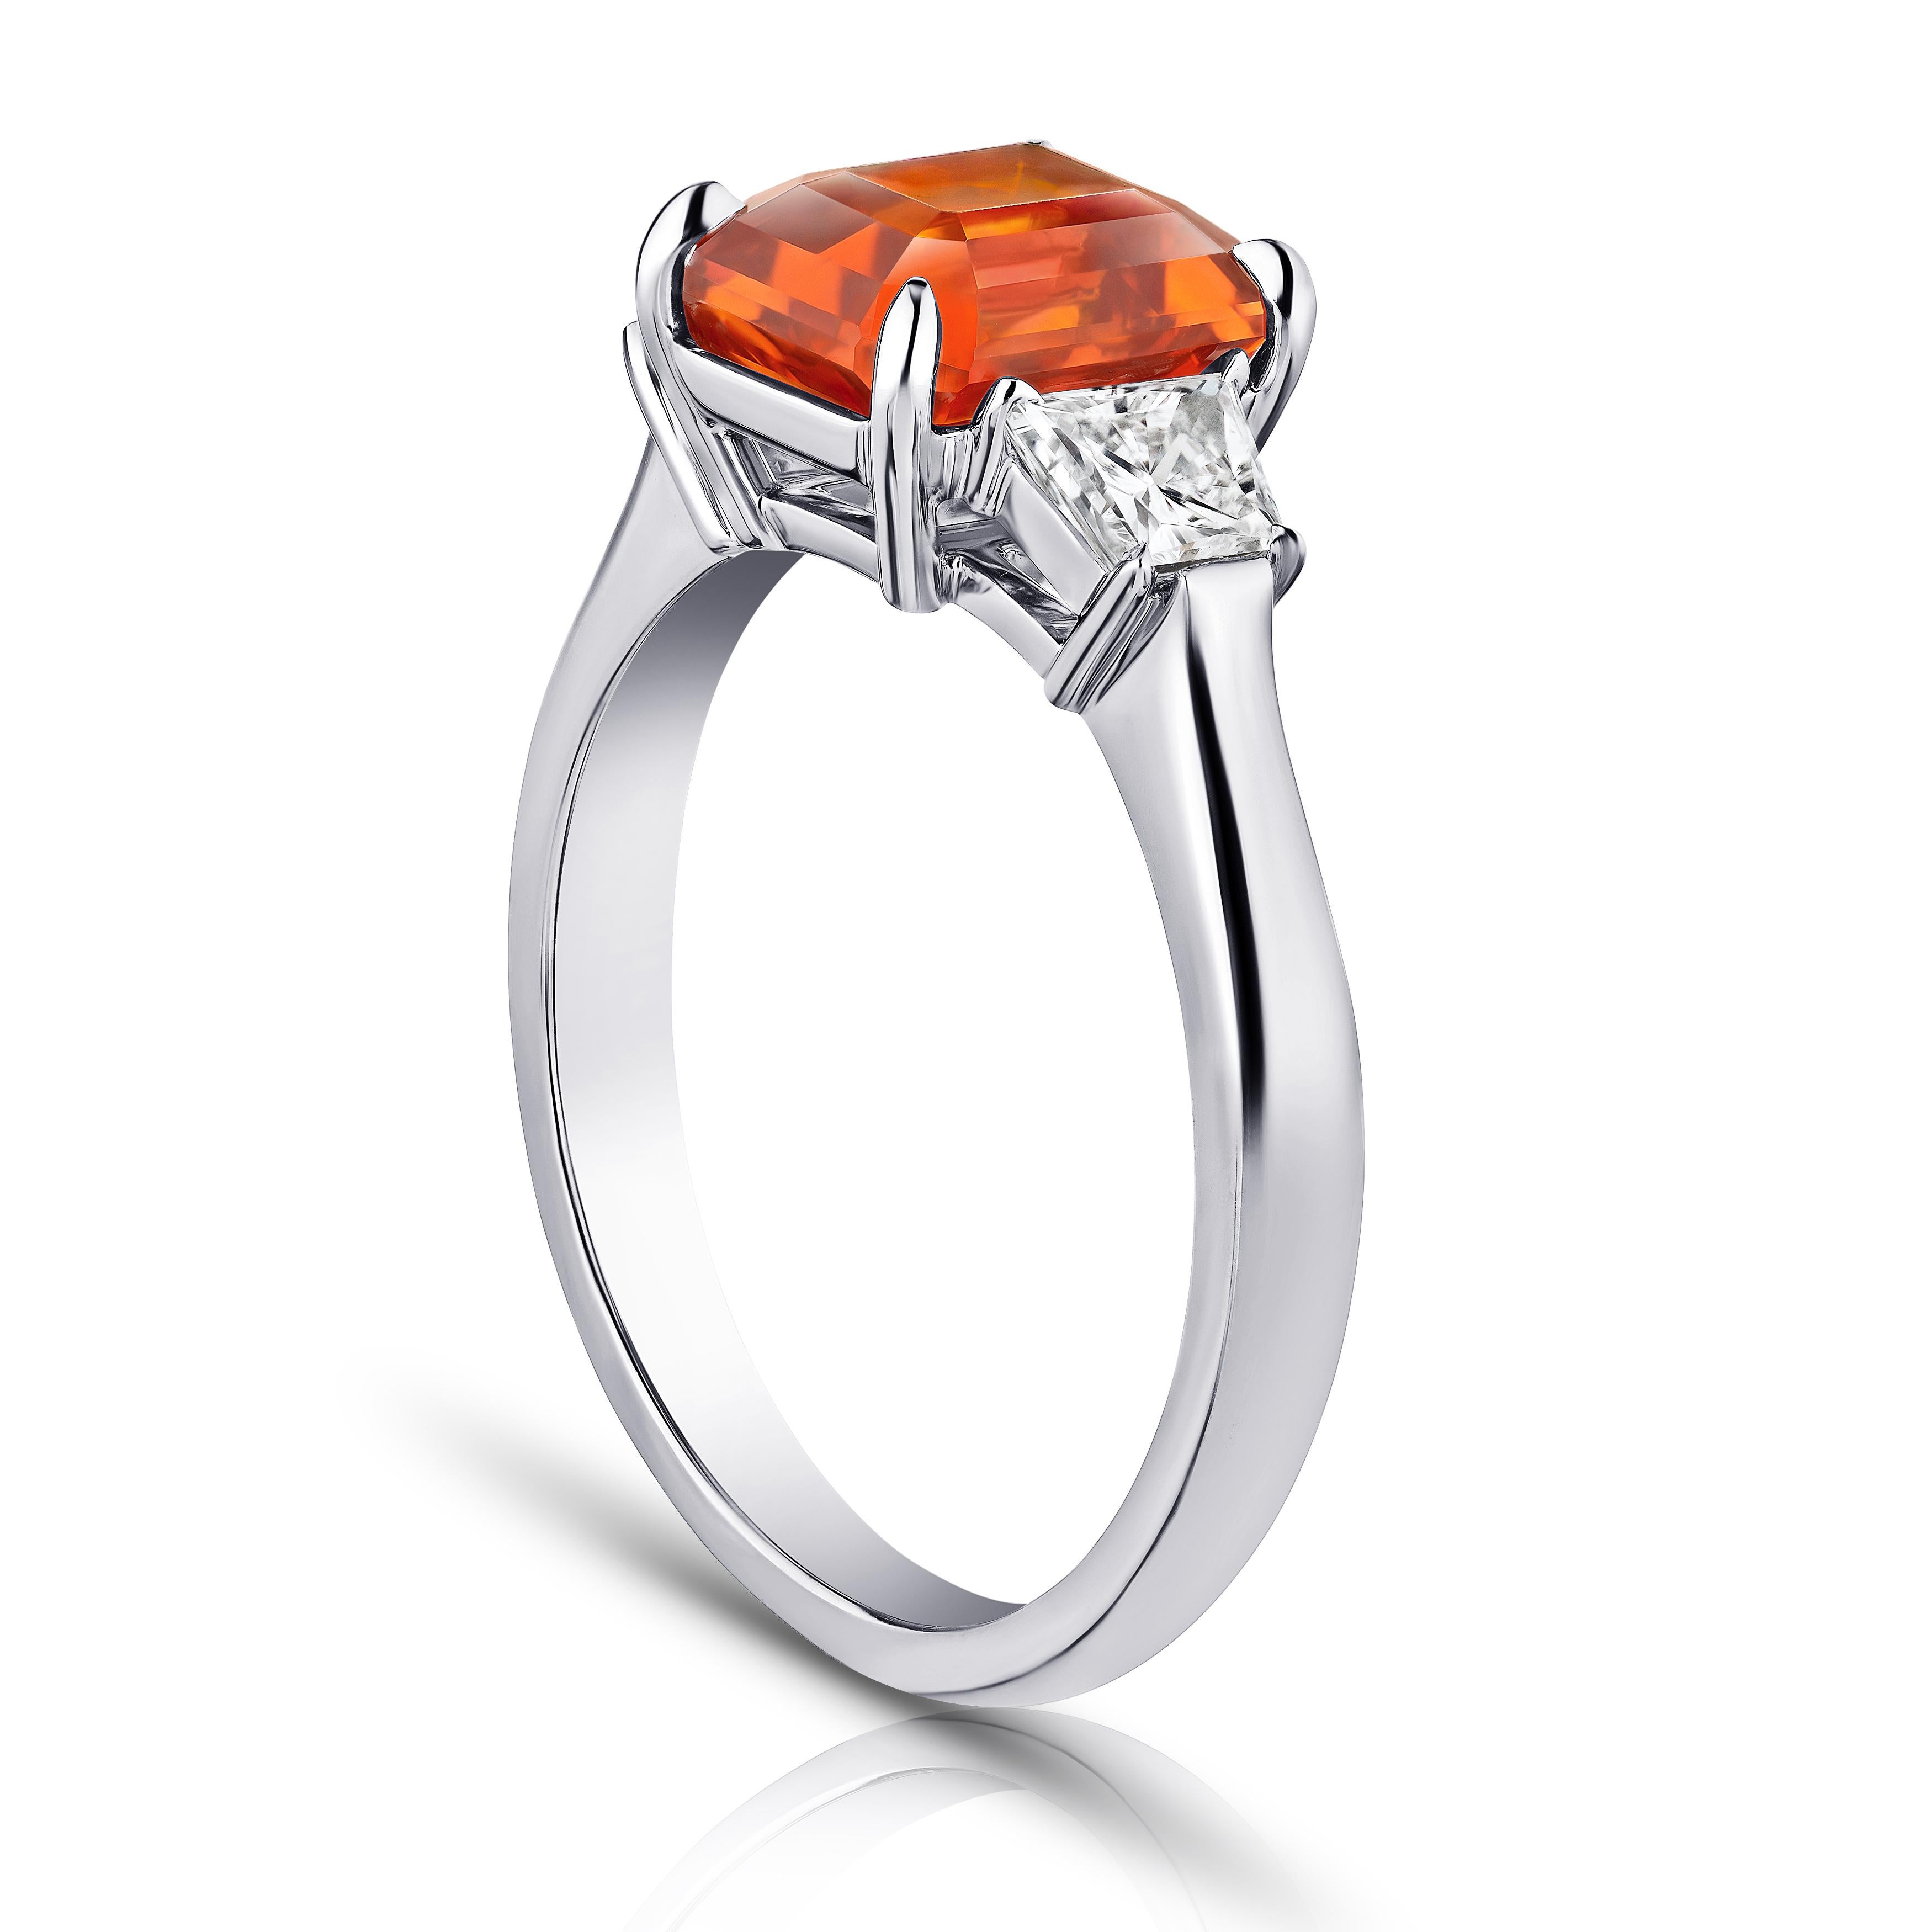 3.21 carat emerald cut orange sapphire with tapered radiant cut diamonds .63 carats set in a platinum ring. Ring is currently a size 7. Resizing to your finger size is included.